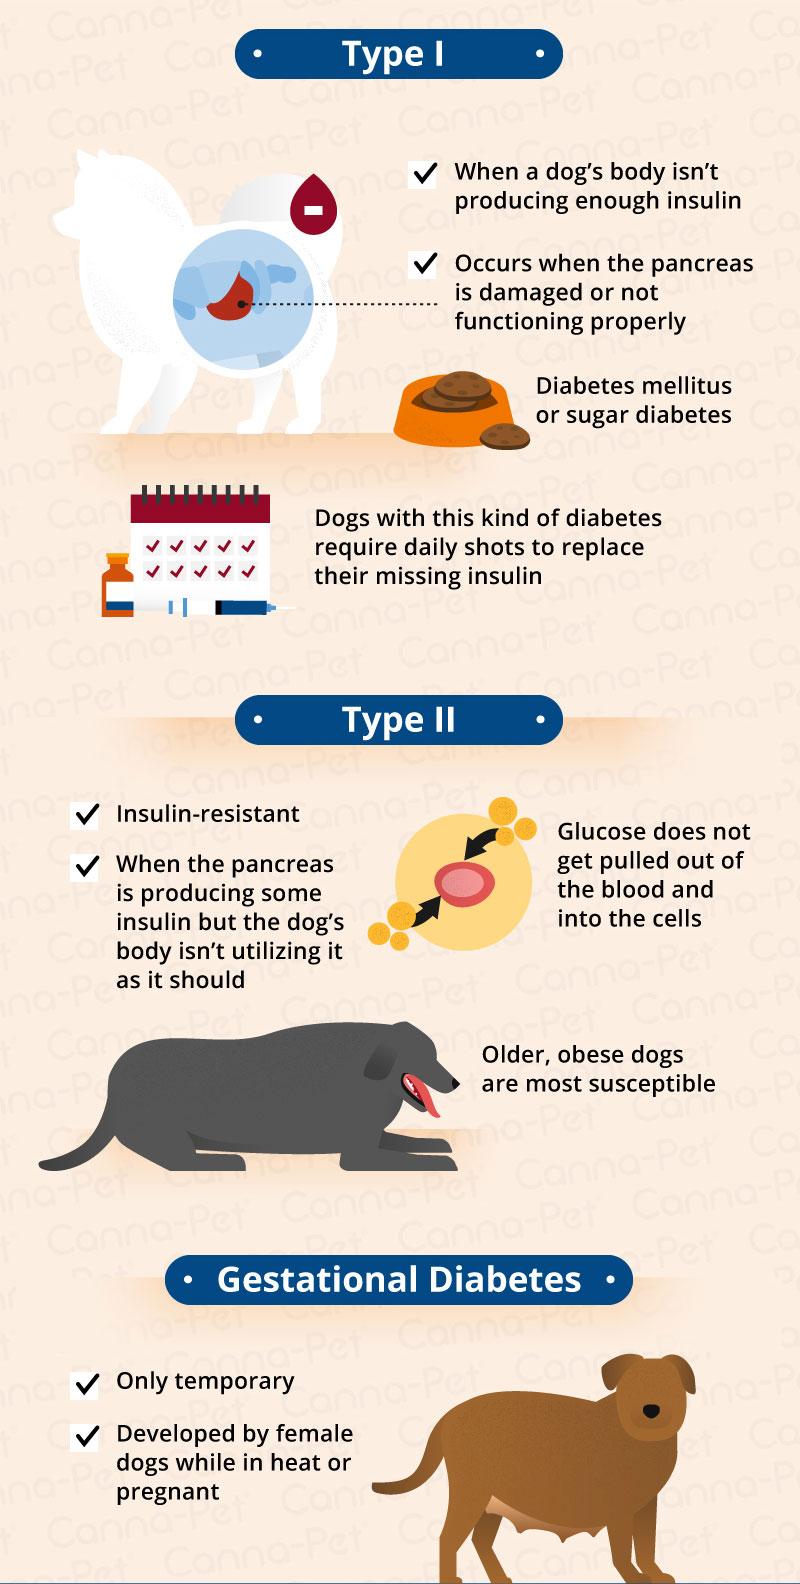 How to Care for a Diabetic Dog?